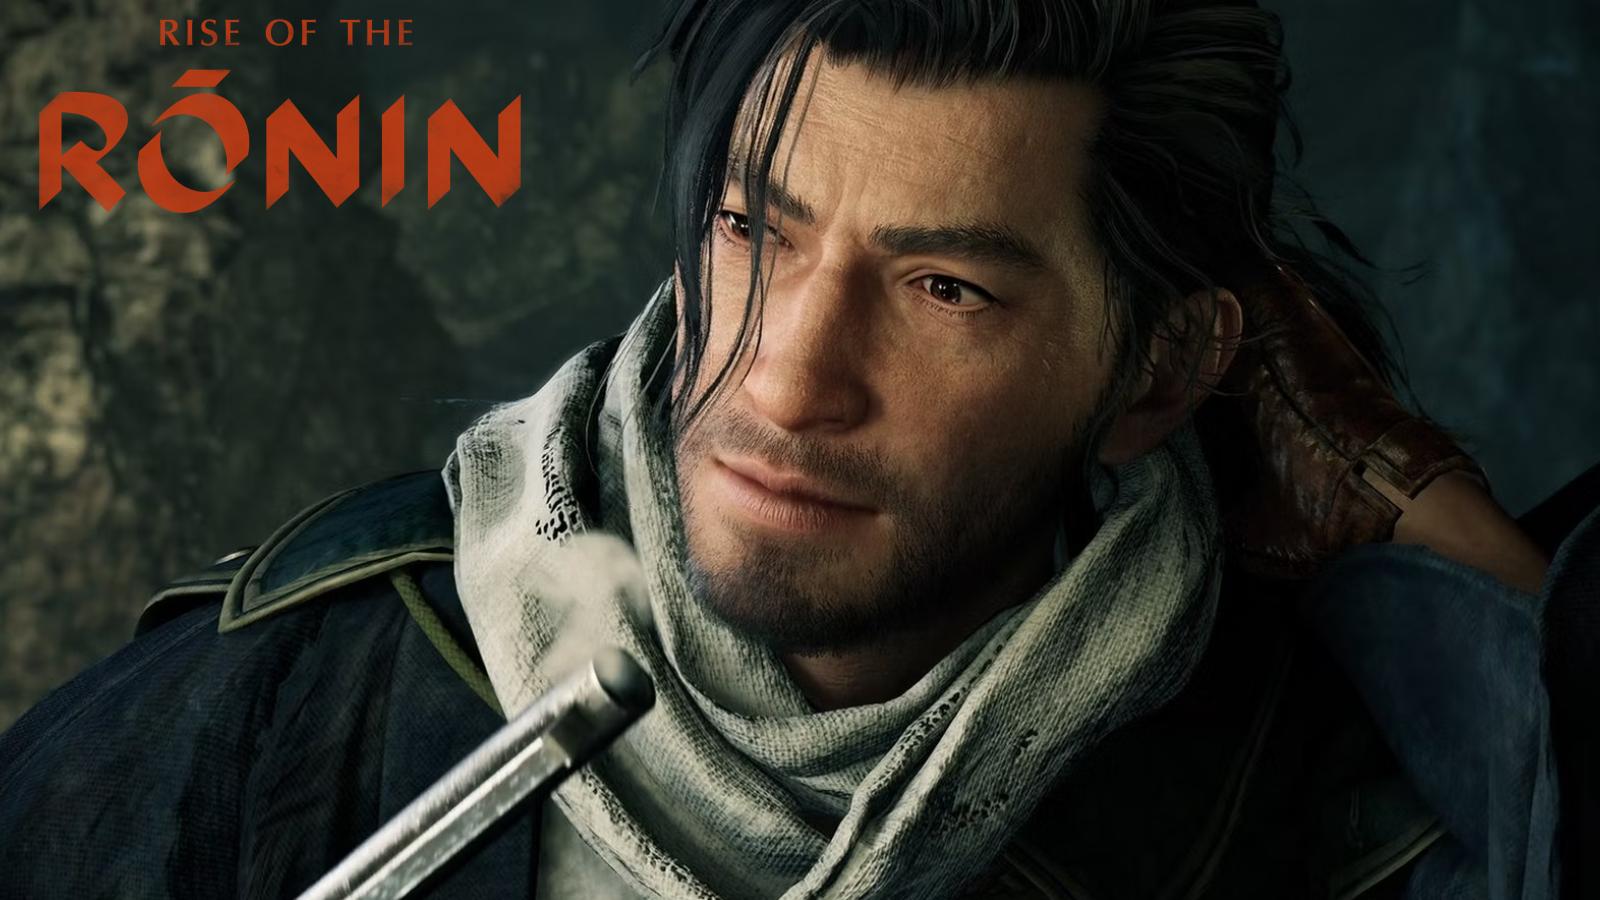 an image of a character in Rise of the Ronin